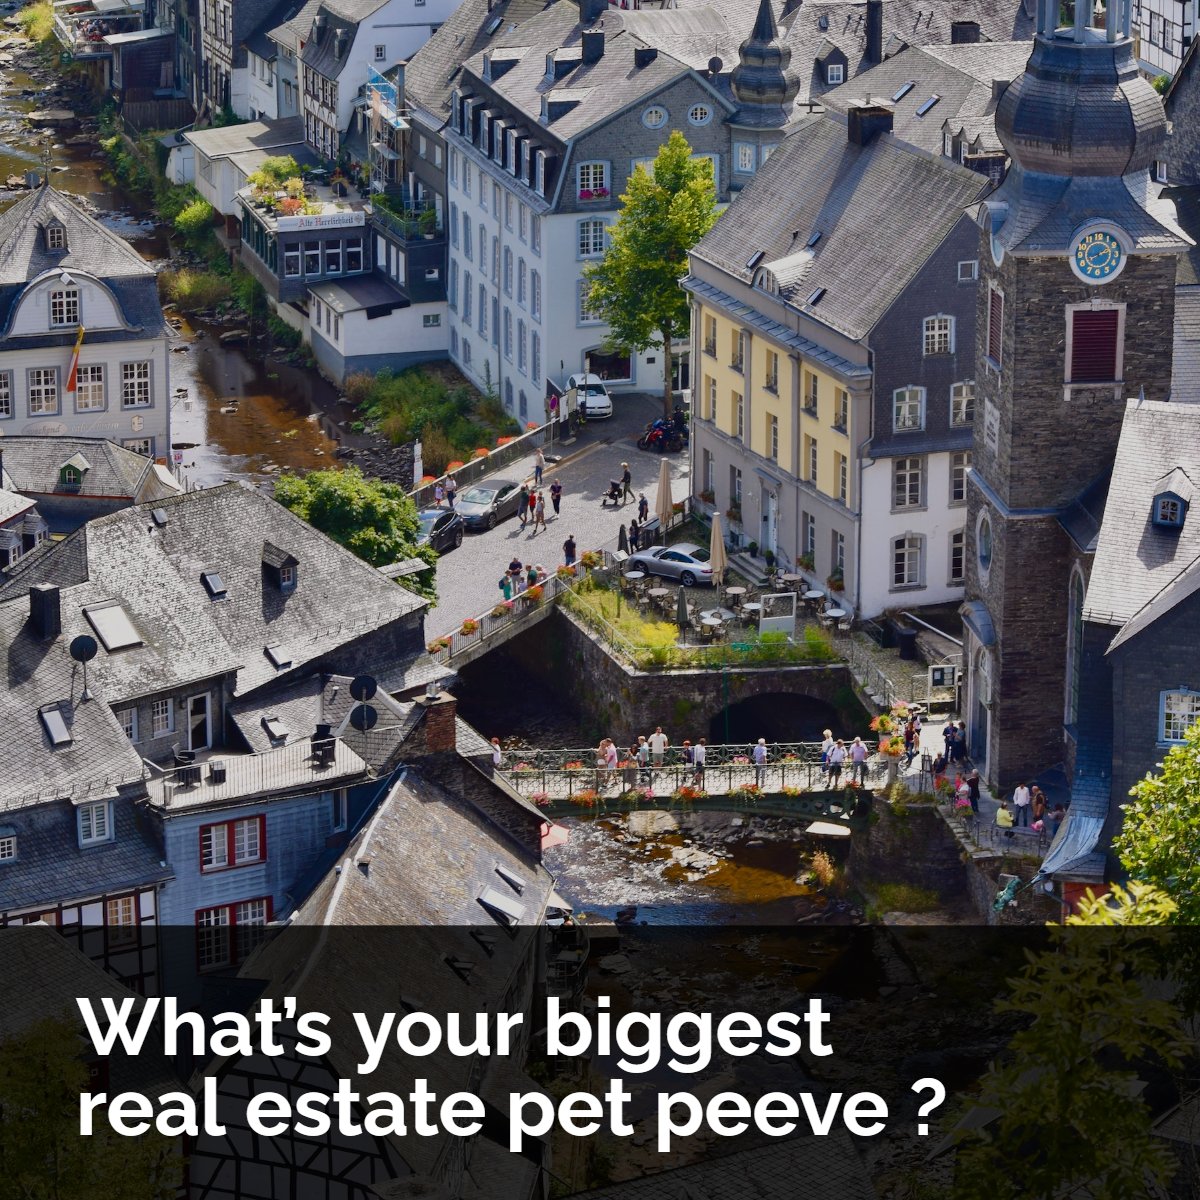 Do you have any Real Estate pet peeves?

Feel free to share them below!

#RealEstate #DreamHome 
 #Realestate #Brokerlife #Marketupdate #thevisiongroup #thevisiongroupres #realtor #Orangecounty #losangelescounty #Riversidecounty #downpaymentassistance #Realestatetips